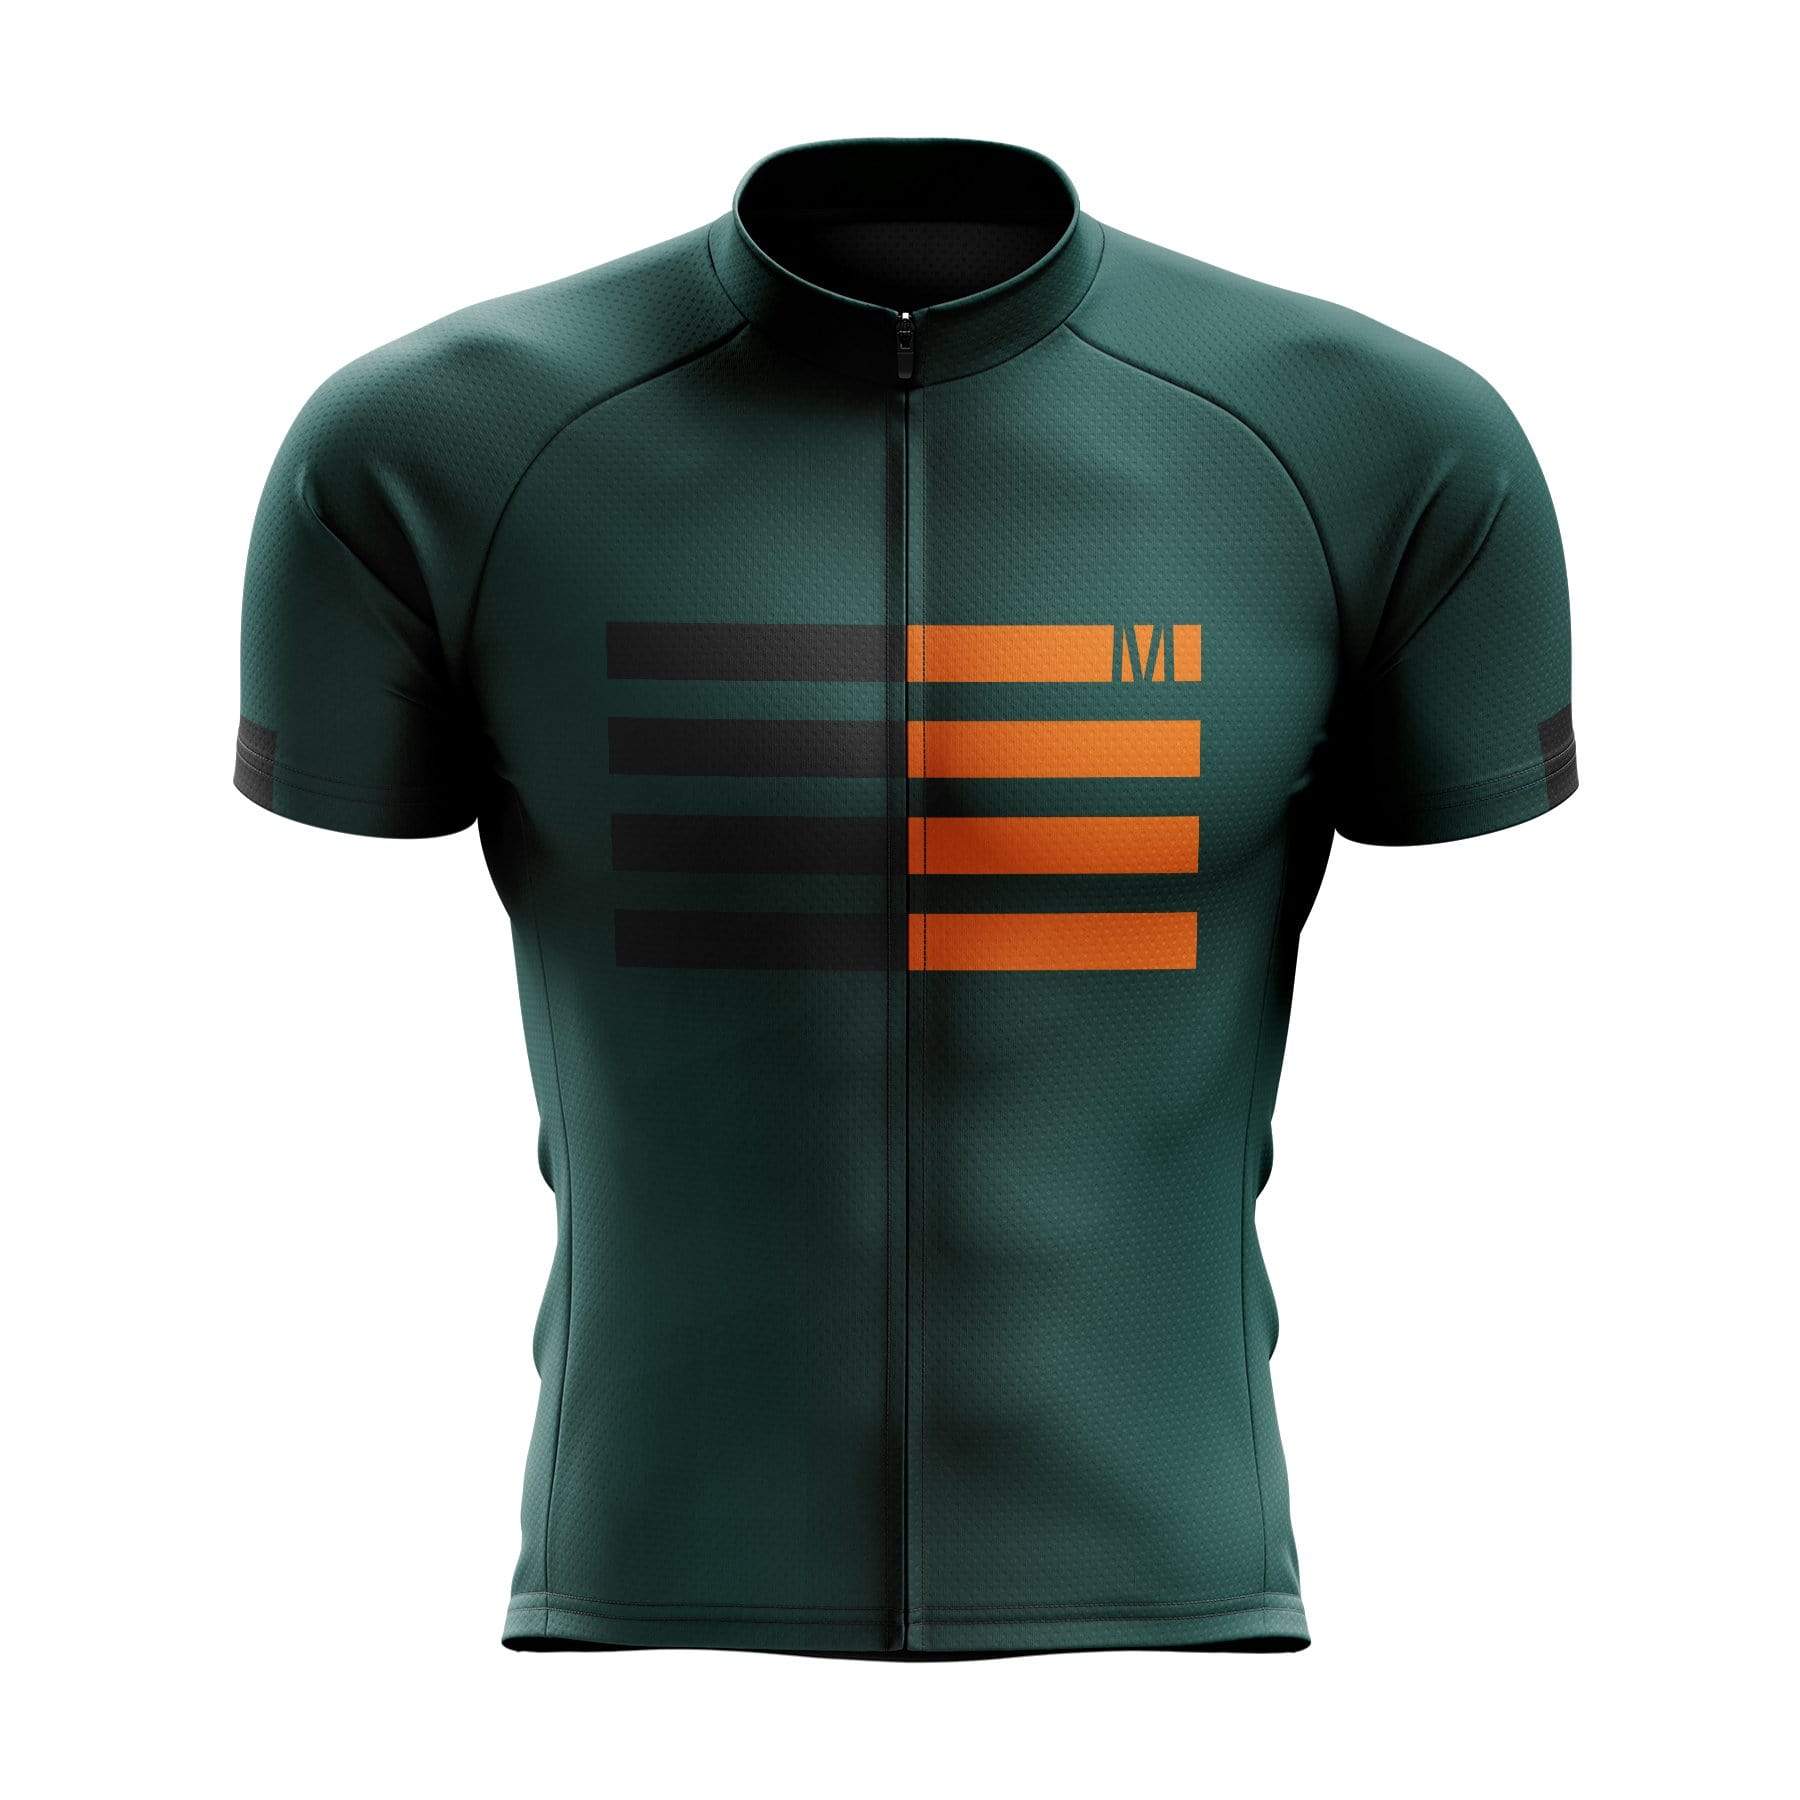 Sanpella Classic colored lines Men's Cycling Jersey